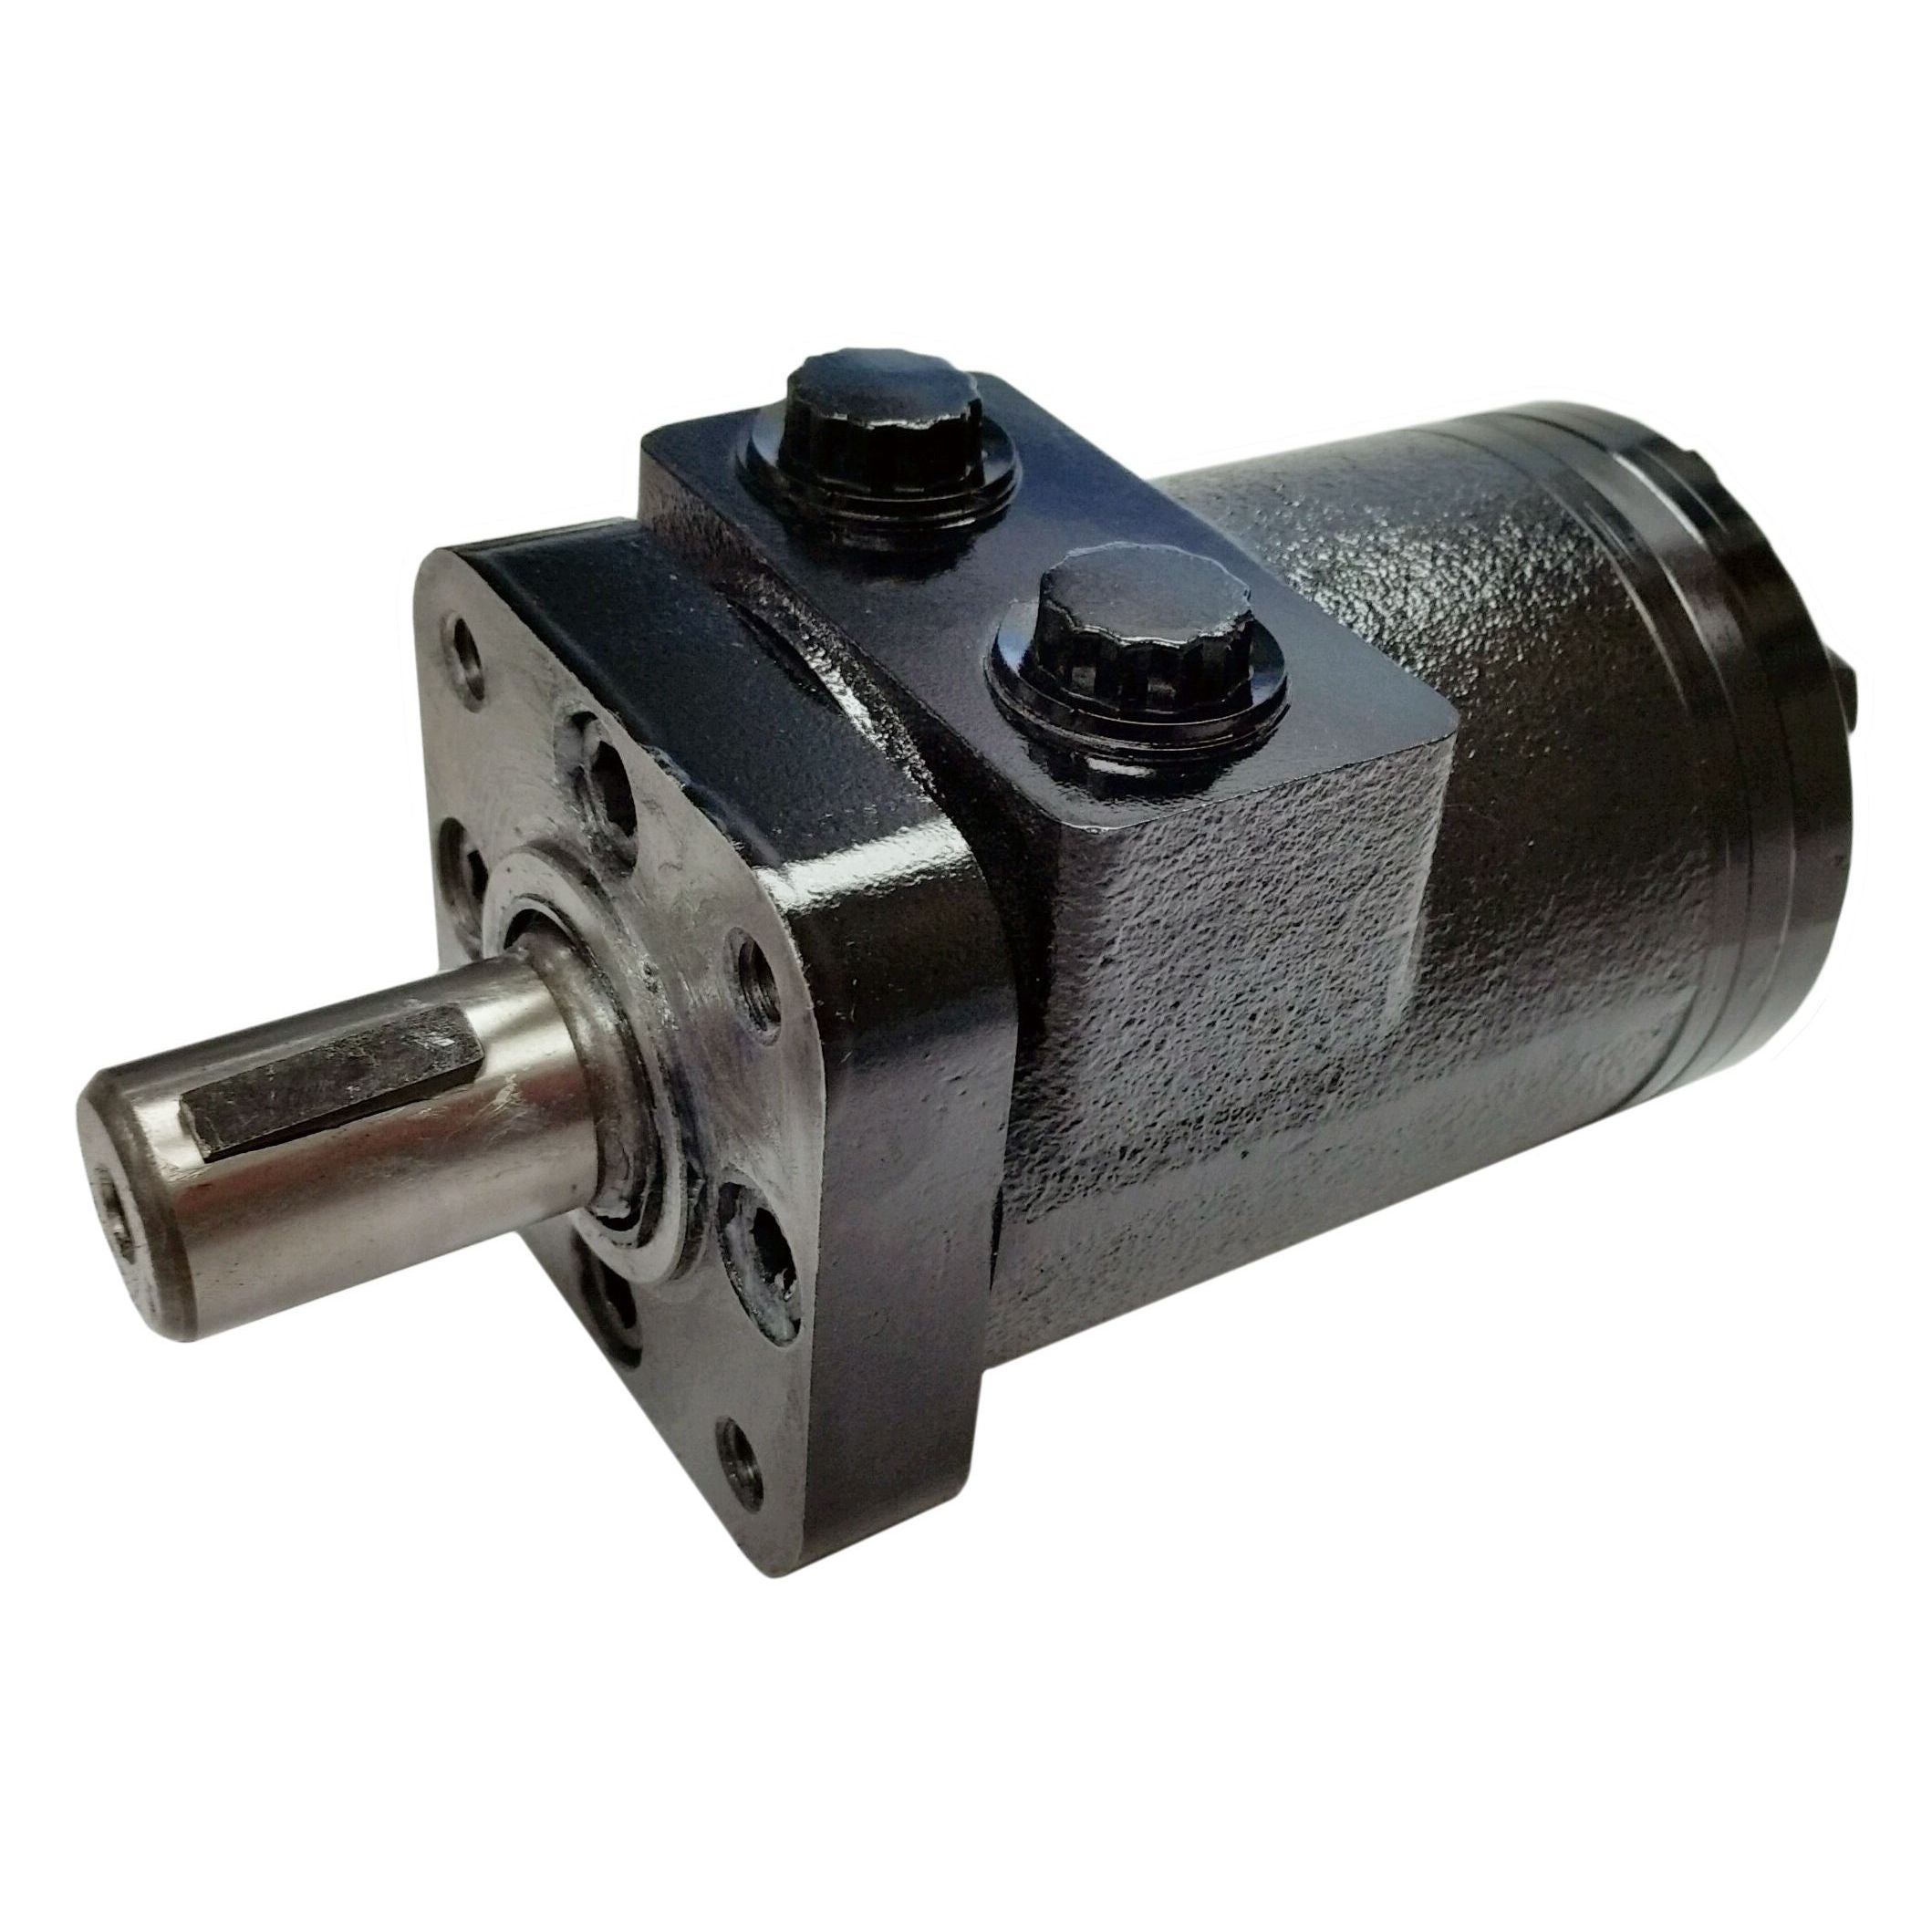 BMPH-36-H4-S-P : Dynamic LSHT Motor, 36cc, 1500RPM, 487in-lb, 1813psi Differential, 14.53GPM, SAE A 4-Bolt Mount, 6-Tooth Shaft, Side Ported, 1/2" NPT